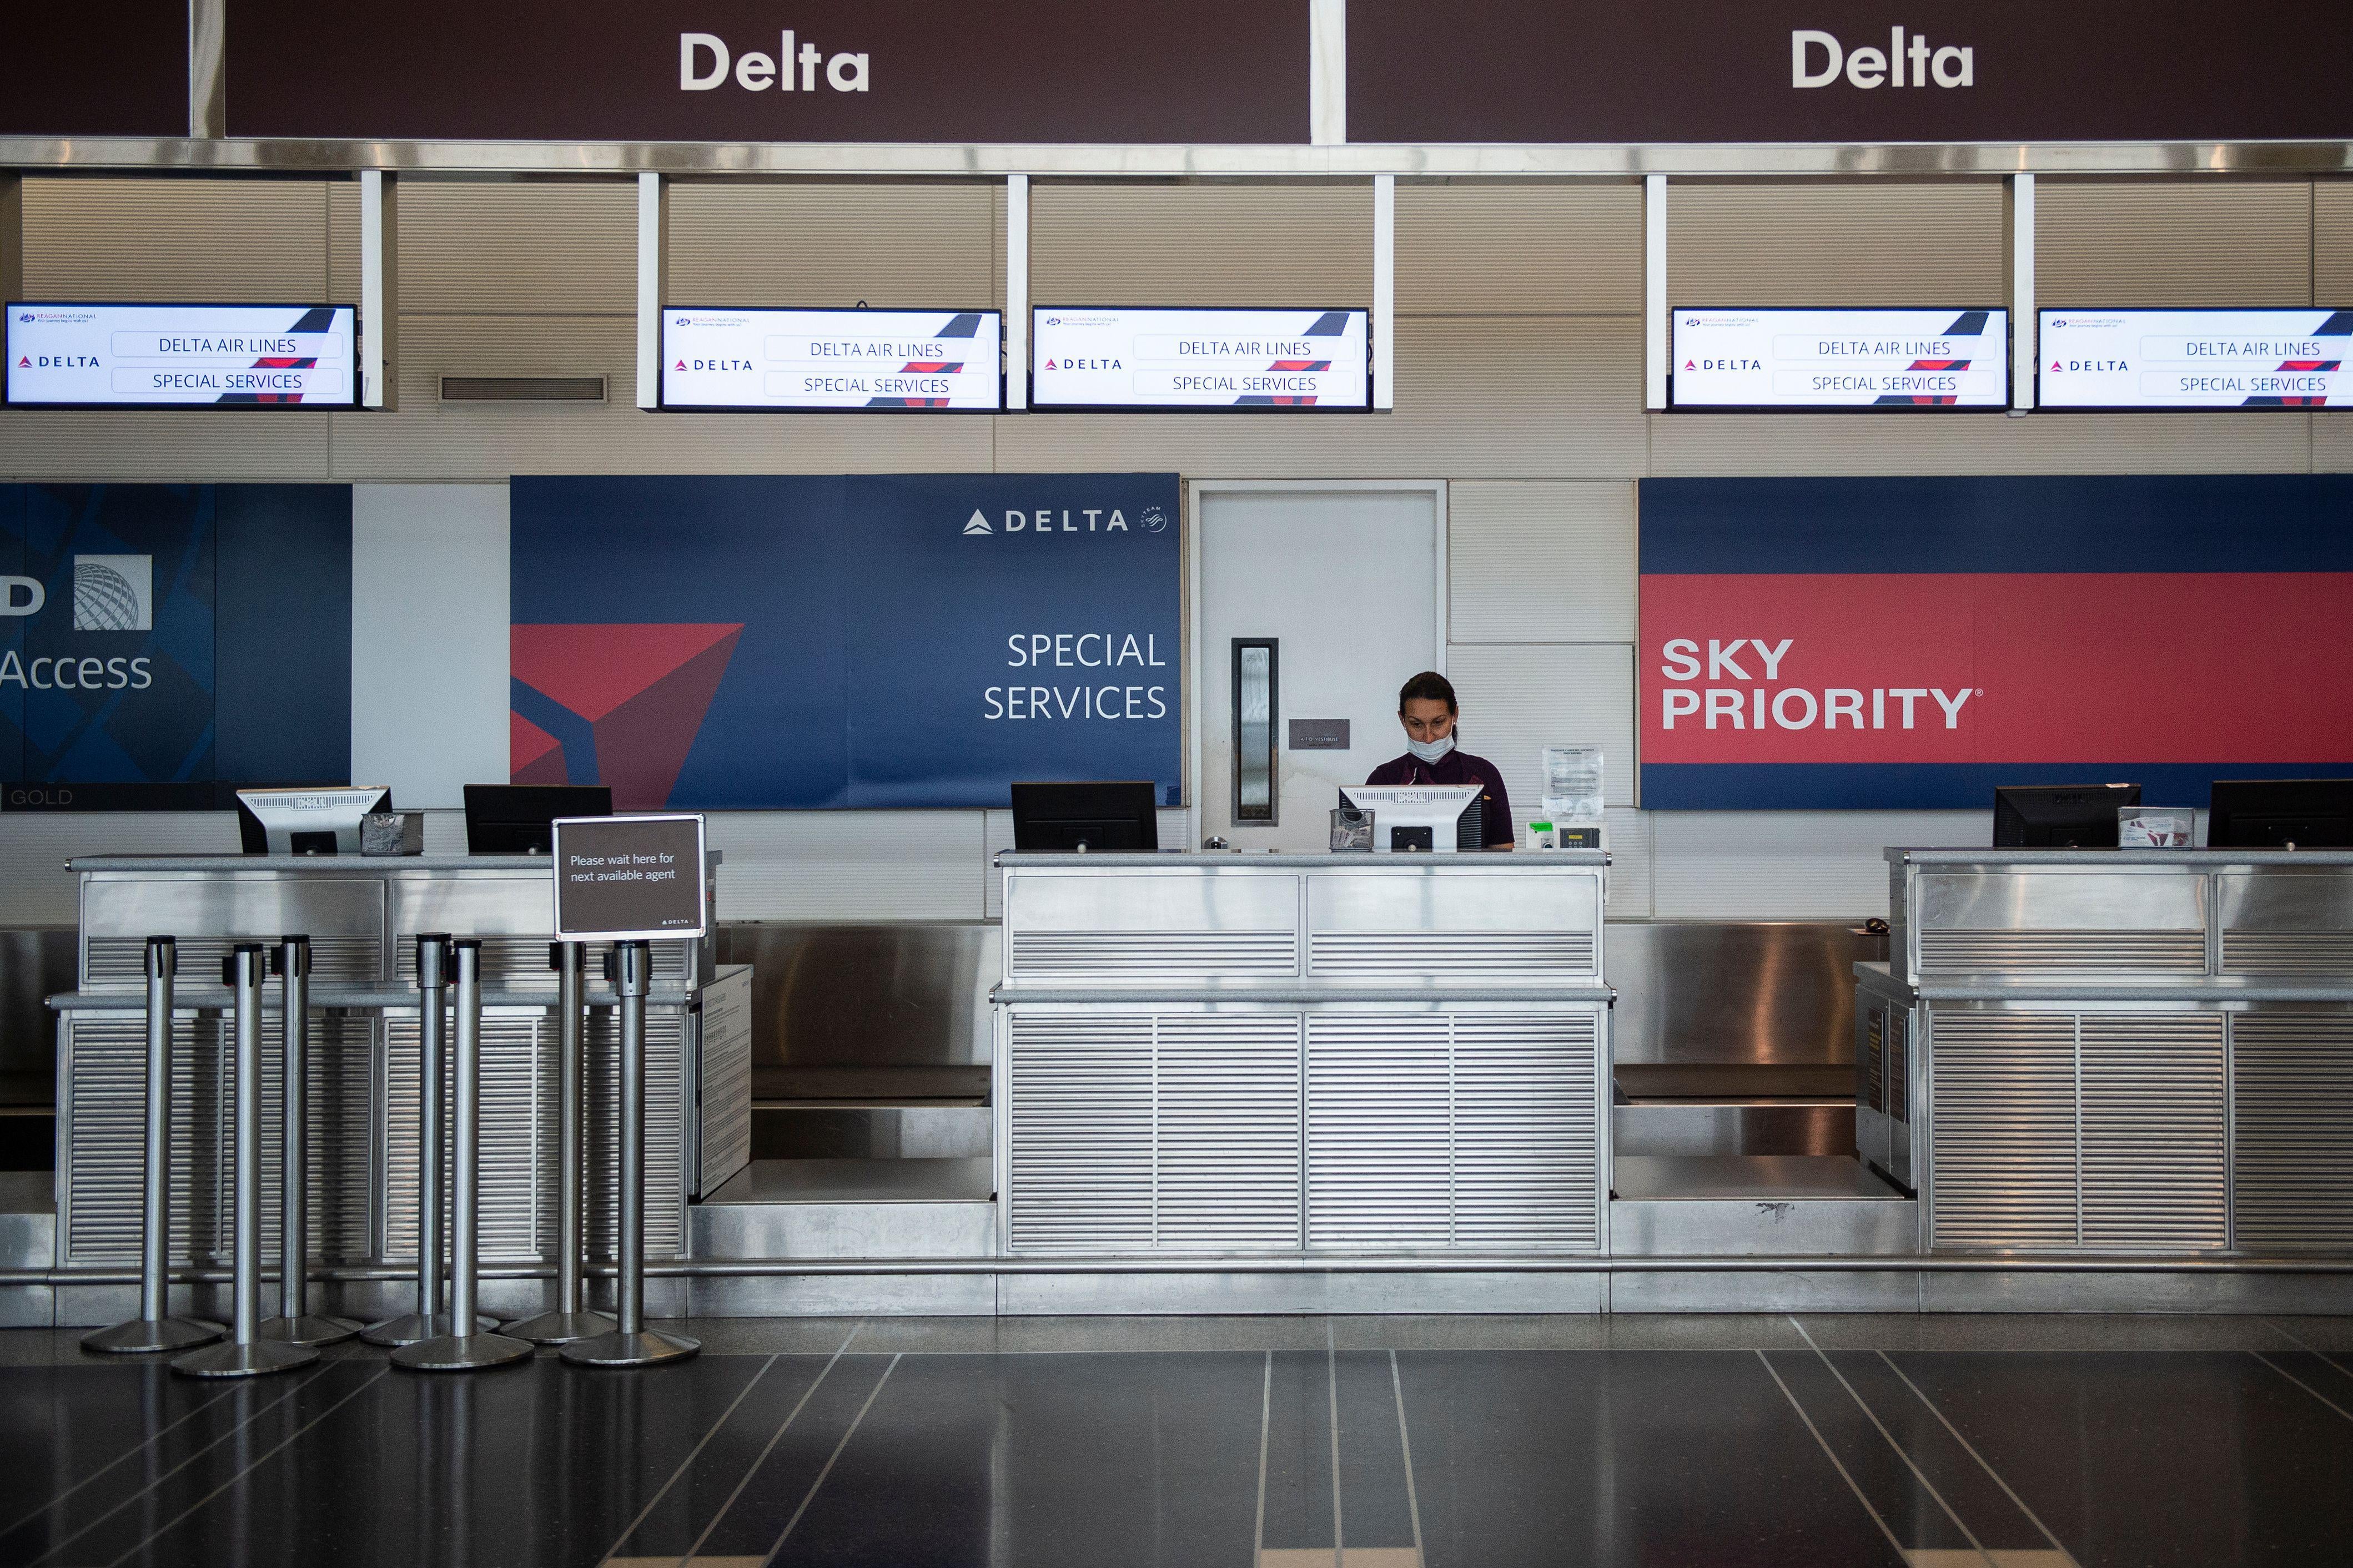 A Delta Air Lines employee waits for passengers at an empty check-in counter in Ronald Reagan Washington National Airport in Arlington, Virginia, on May 12, 2020. - The airline industry has been hit hard by the COVID-19 pandemic, with the number of people flying having decreased by more than 90 percent since the beginning of March. (Photo by ANDREW CABALLERO-REYNOLDS / AFP) (Photo by ANDREW CABALLERO-REYNOLDS/AFP via Getty Images)